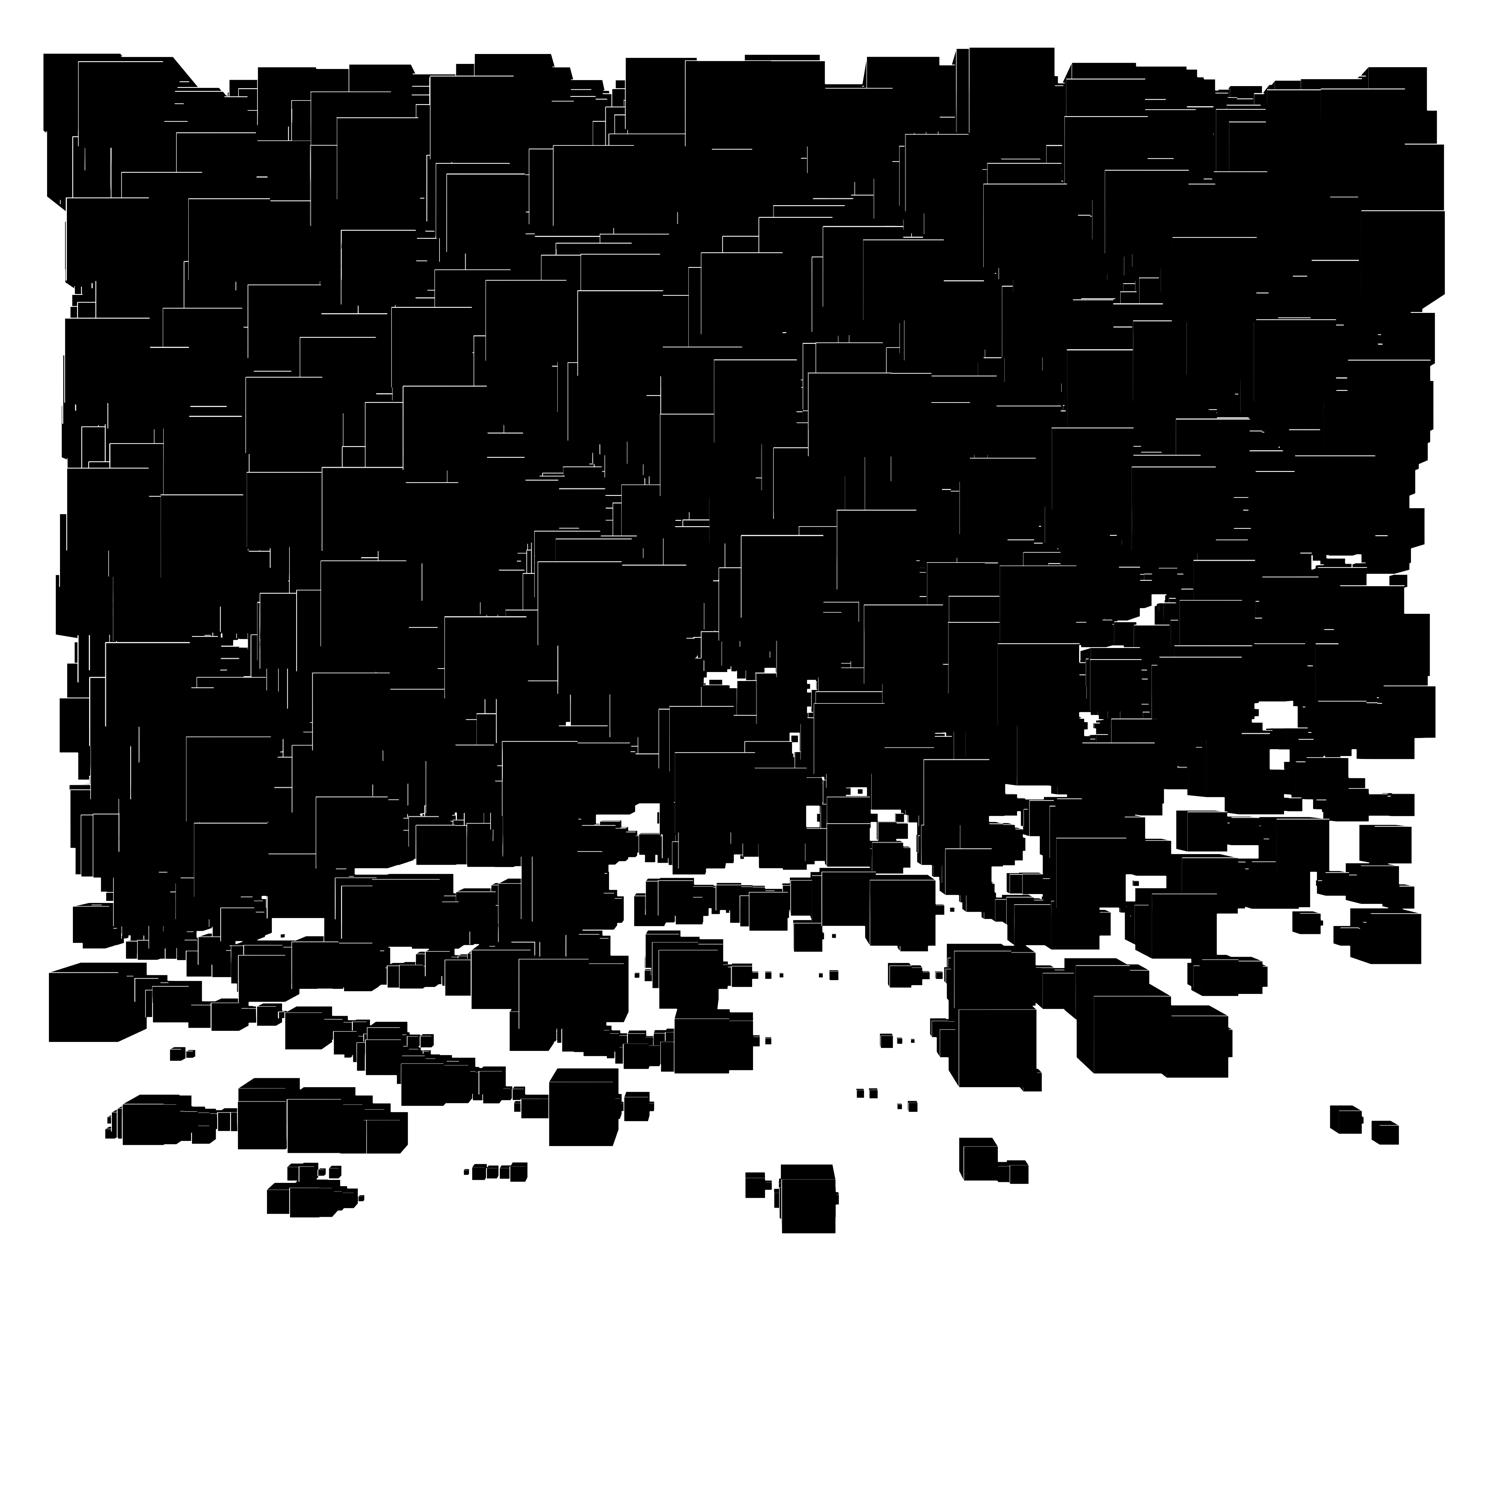 An 3D abstract rendering of black squares on a white background in a random pattern